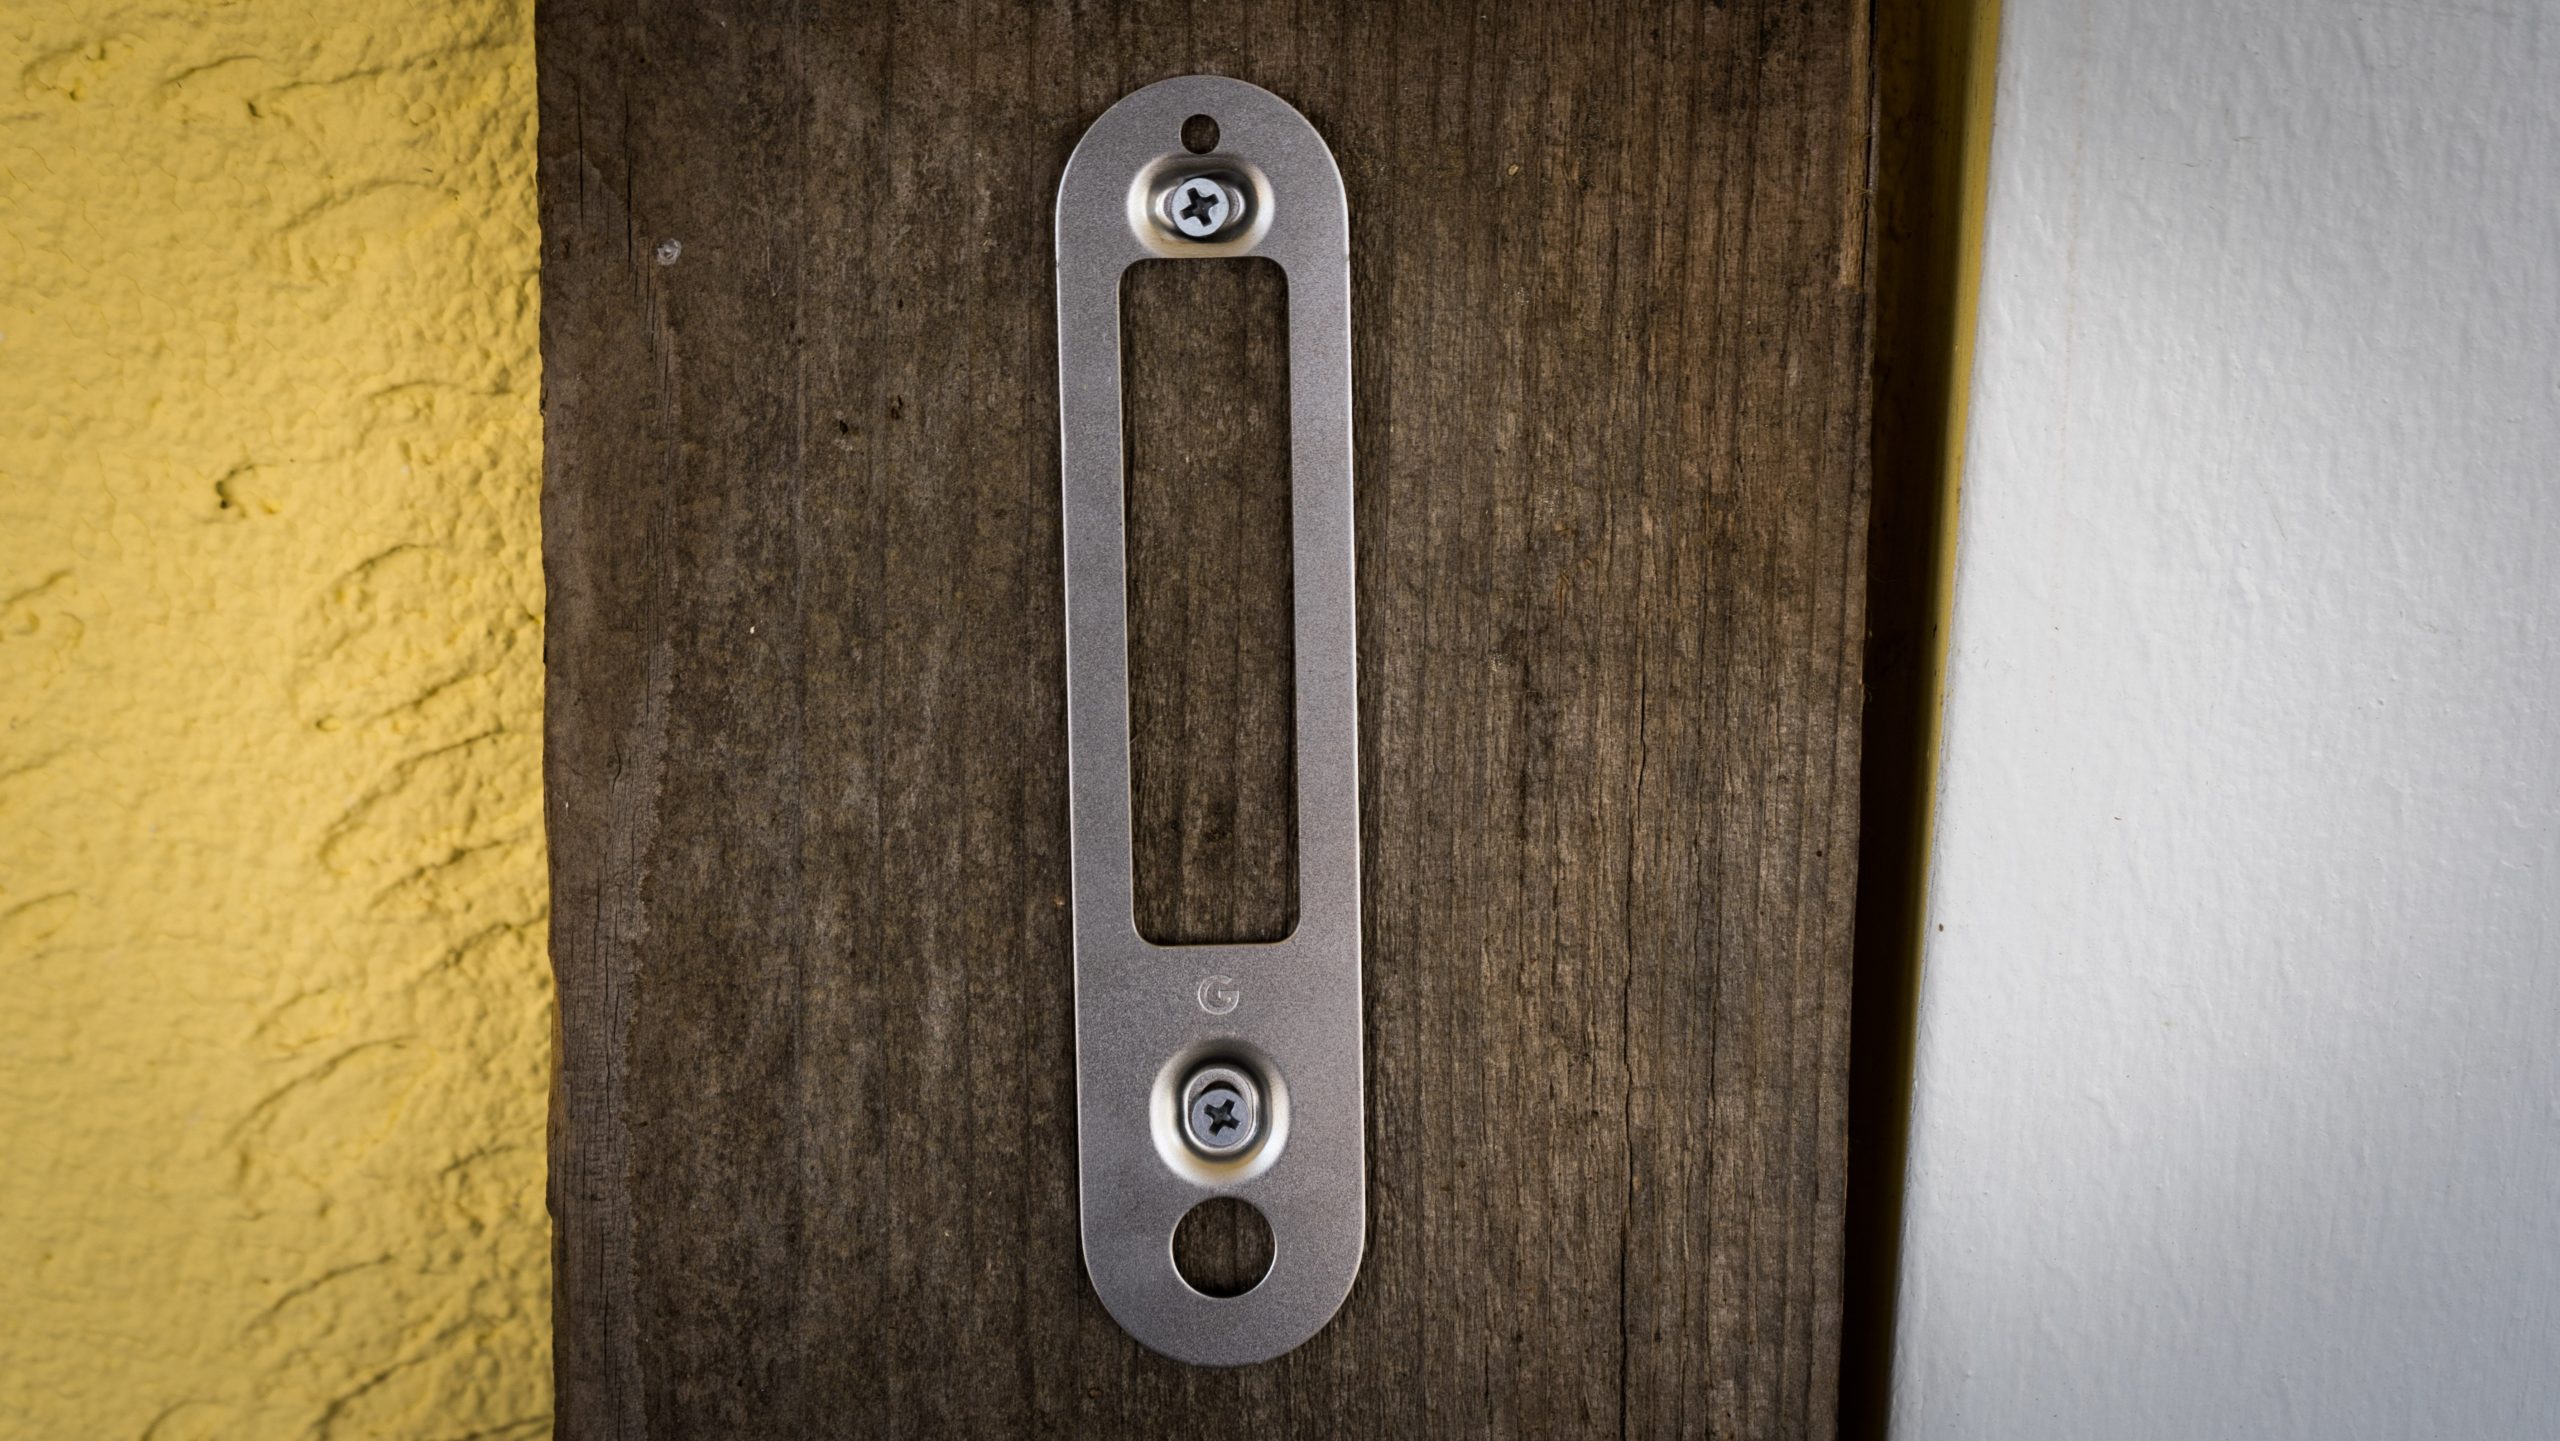 Renters, beware: If your place doesn't allow you to put holes in the exterior, you might have a hard time placing this doorbell camera. (Photo: Florence Ion / Gizmodo)